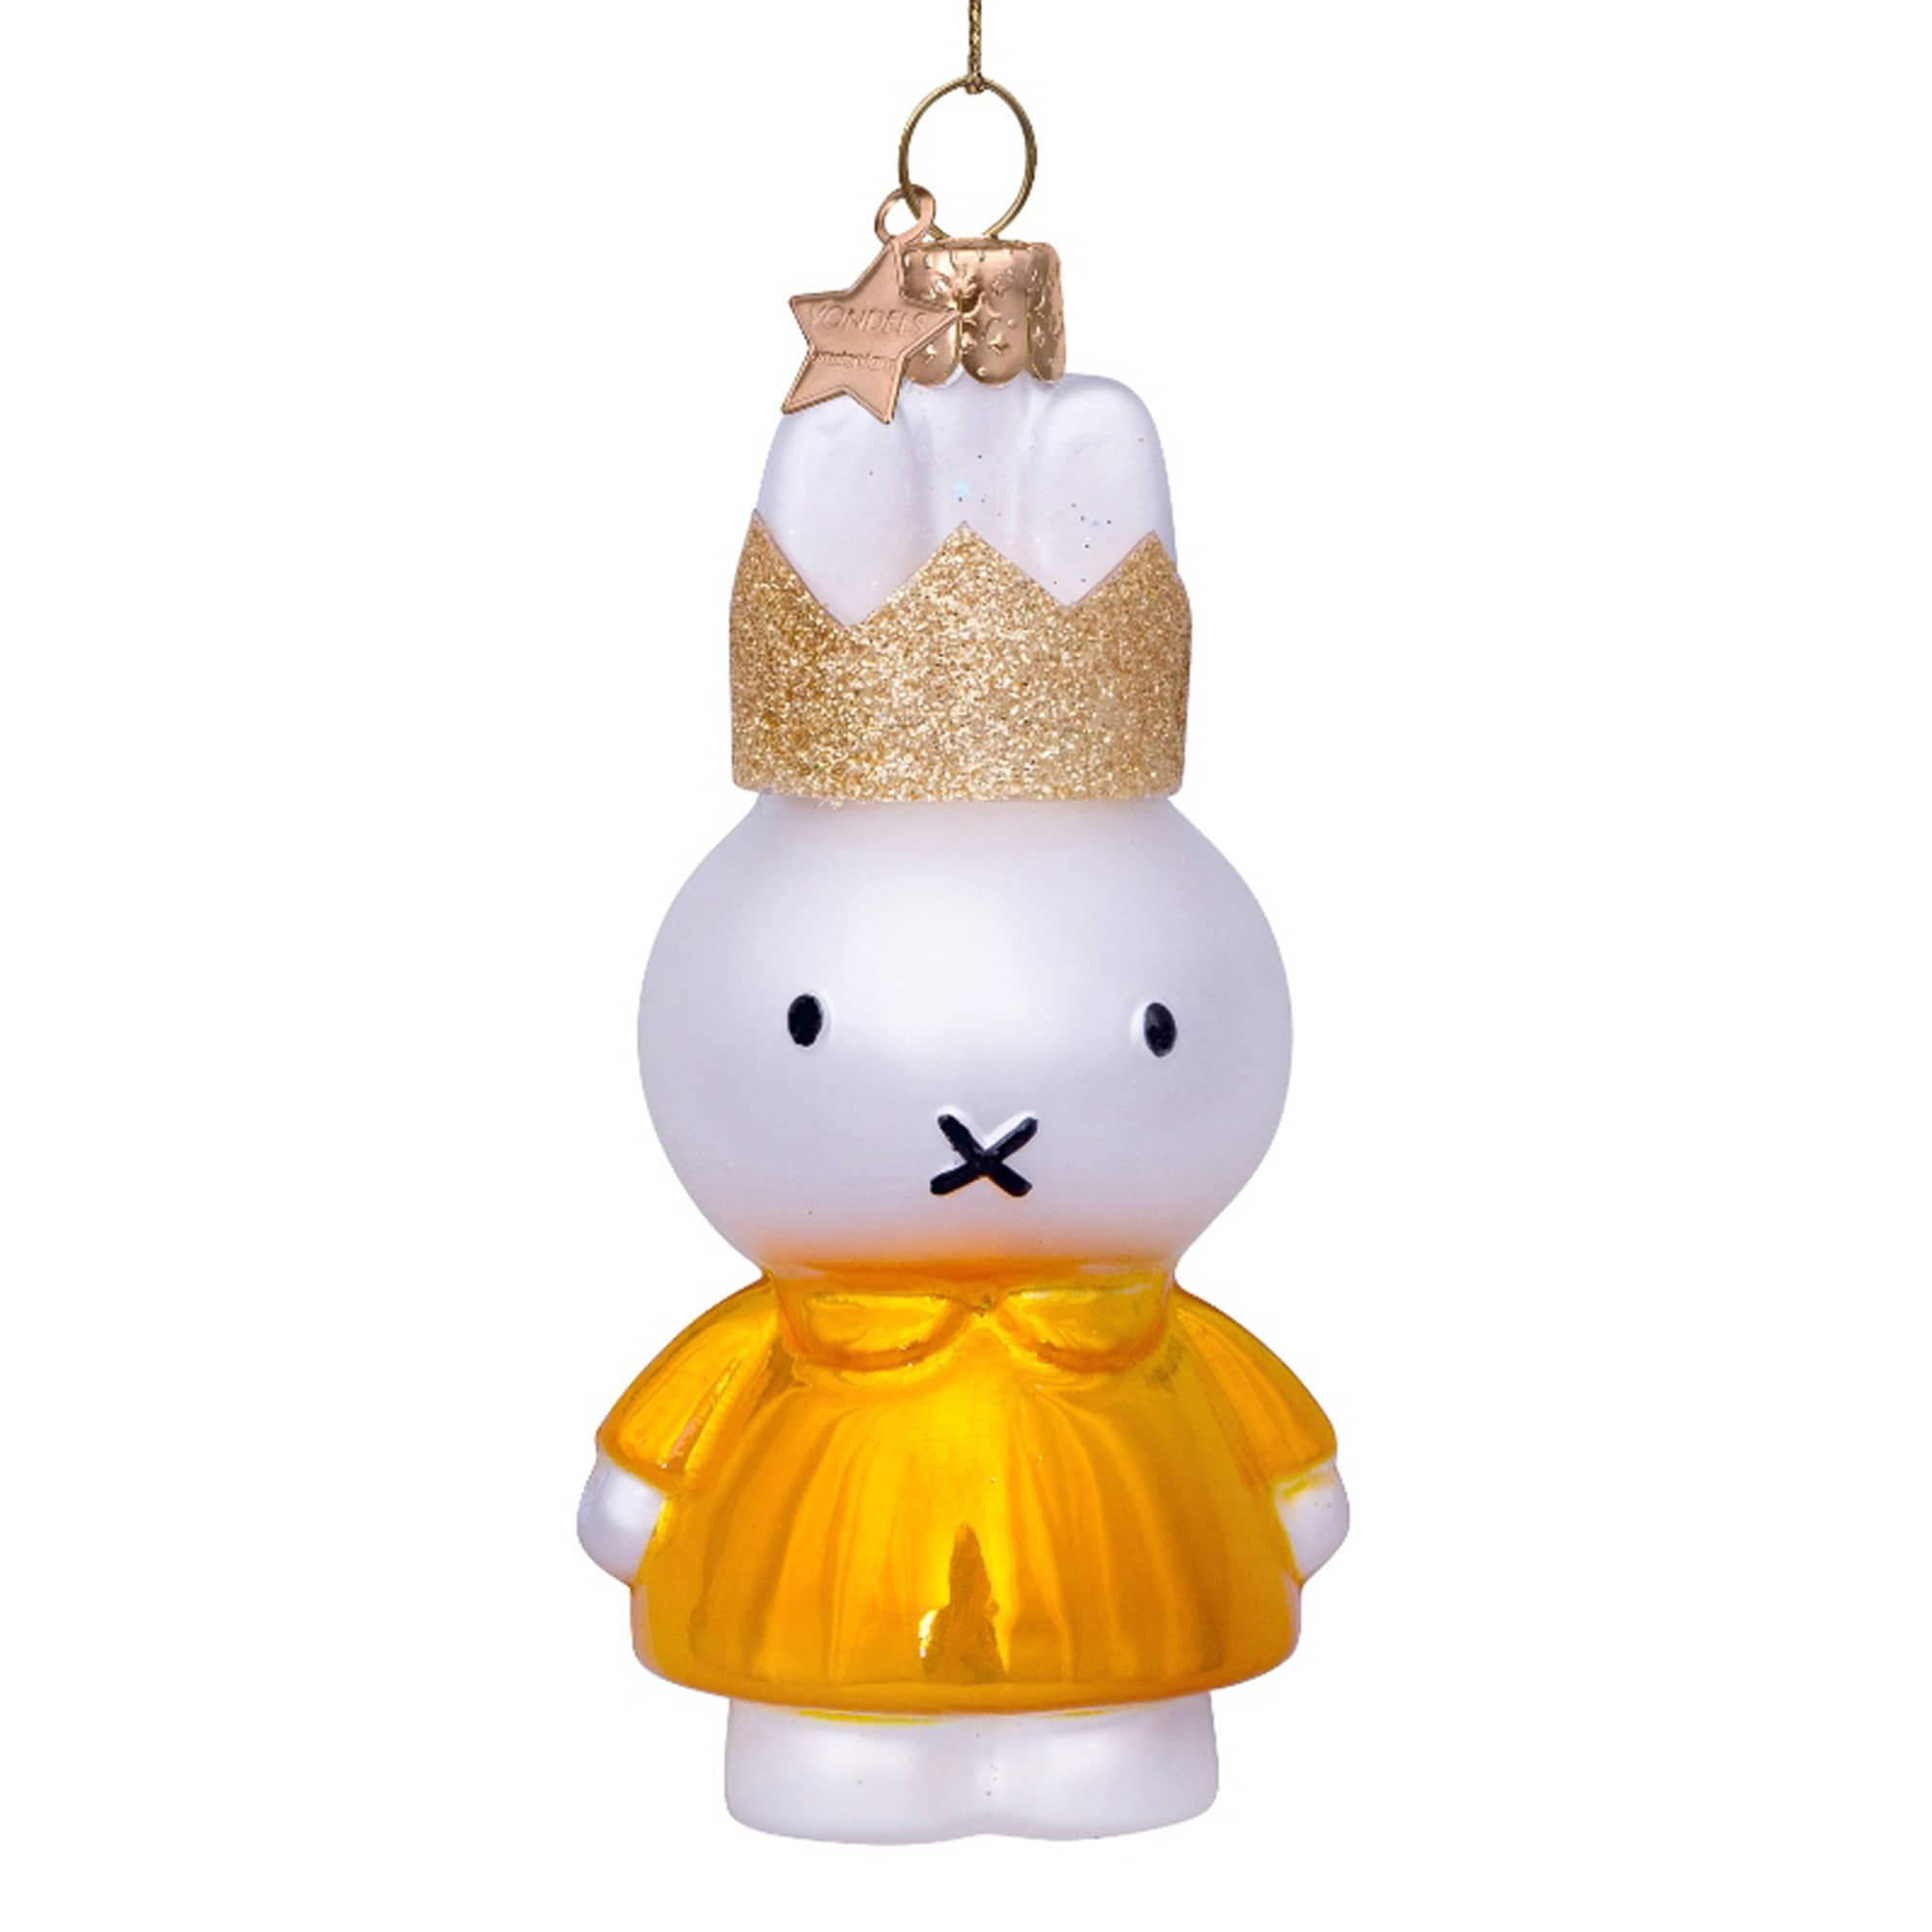 VONDELS Ornament Glass Miffy Yellow Dress with Crown